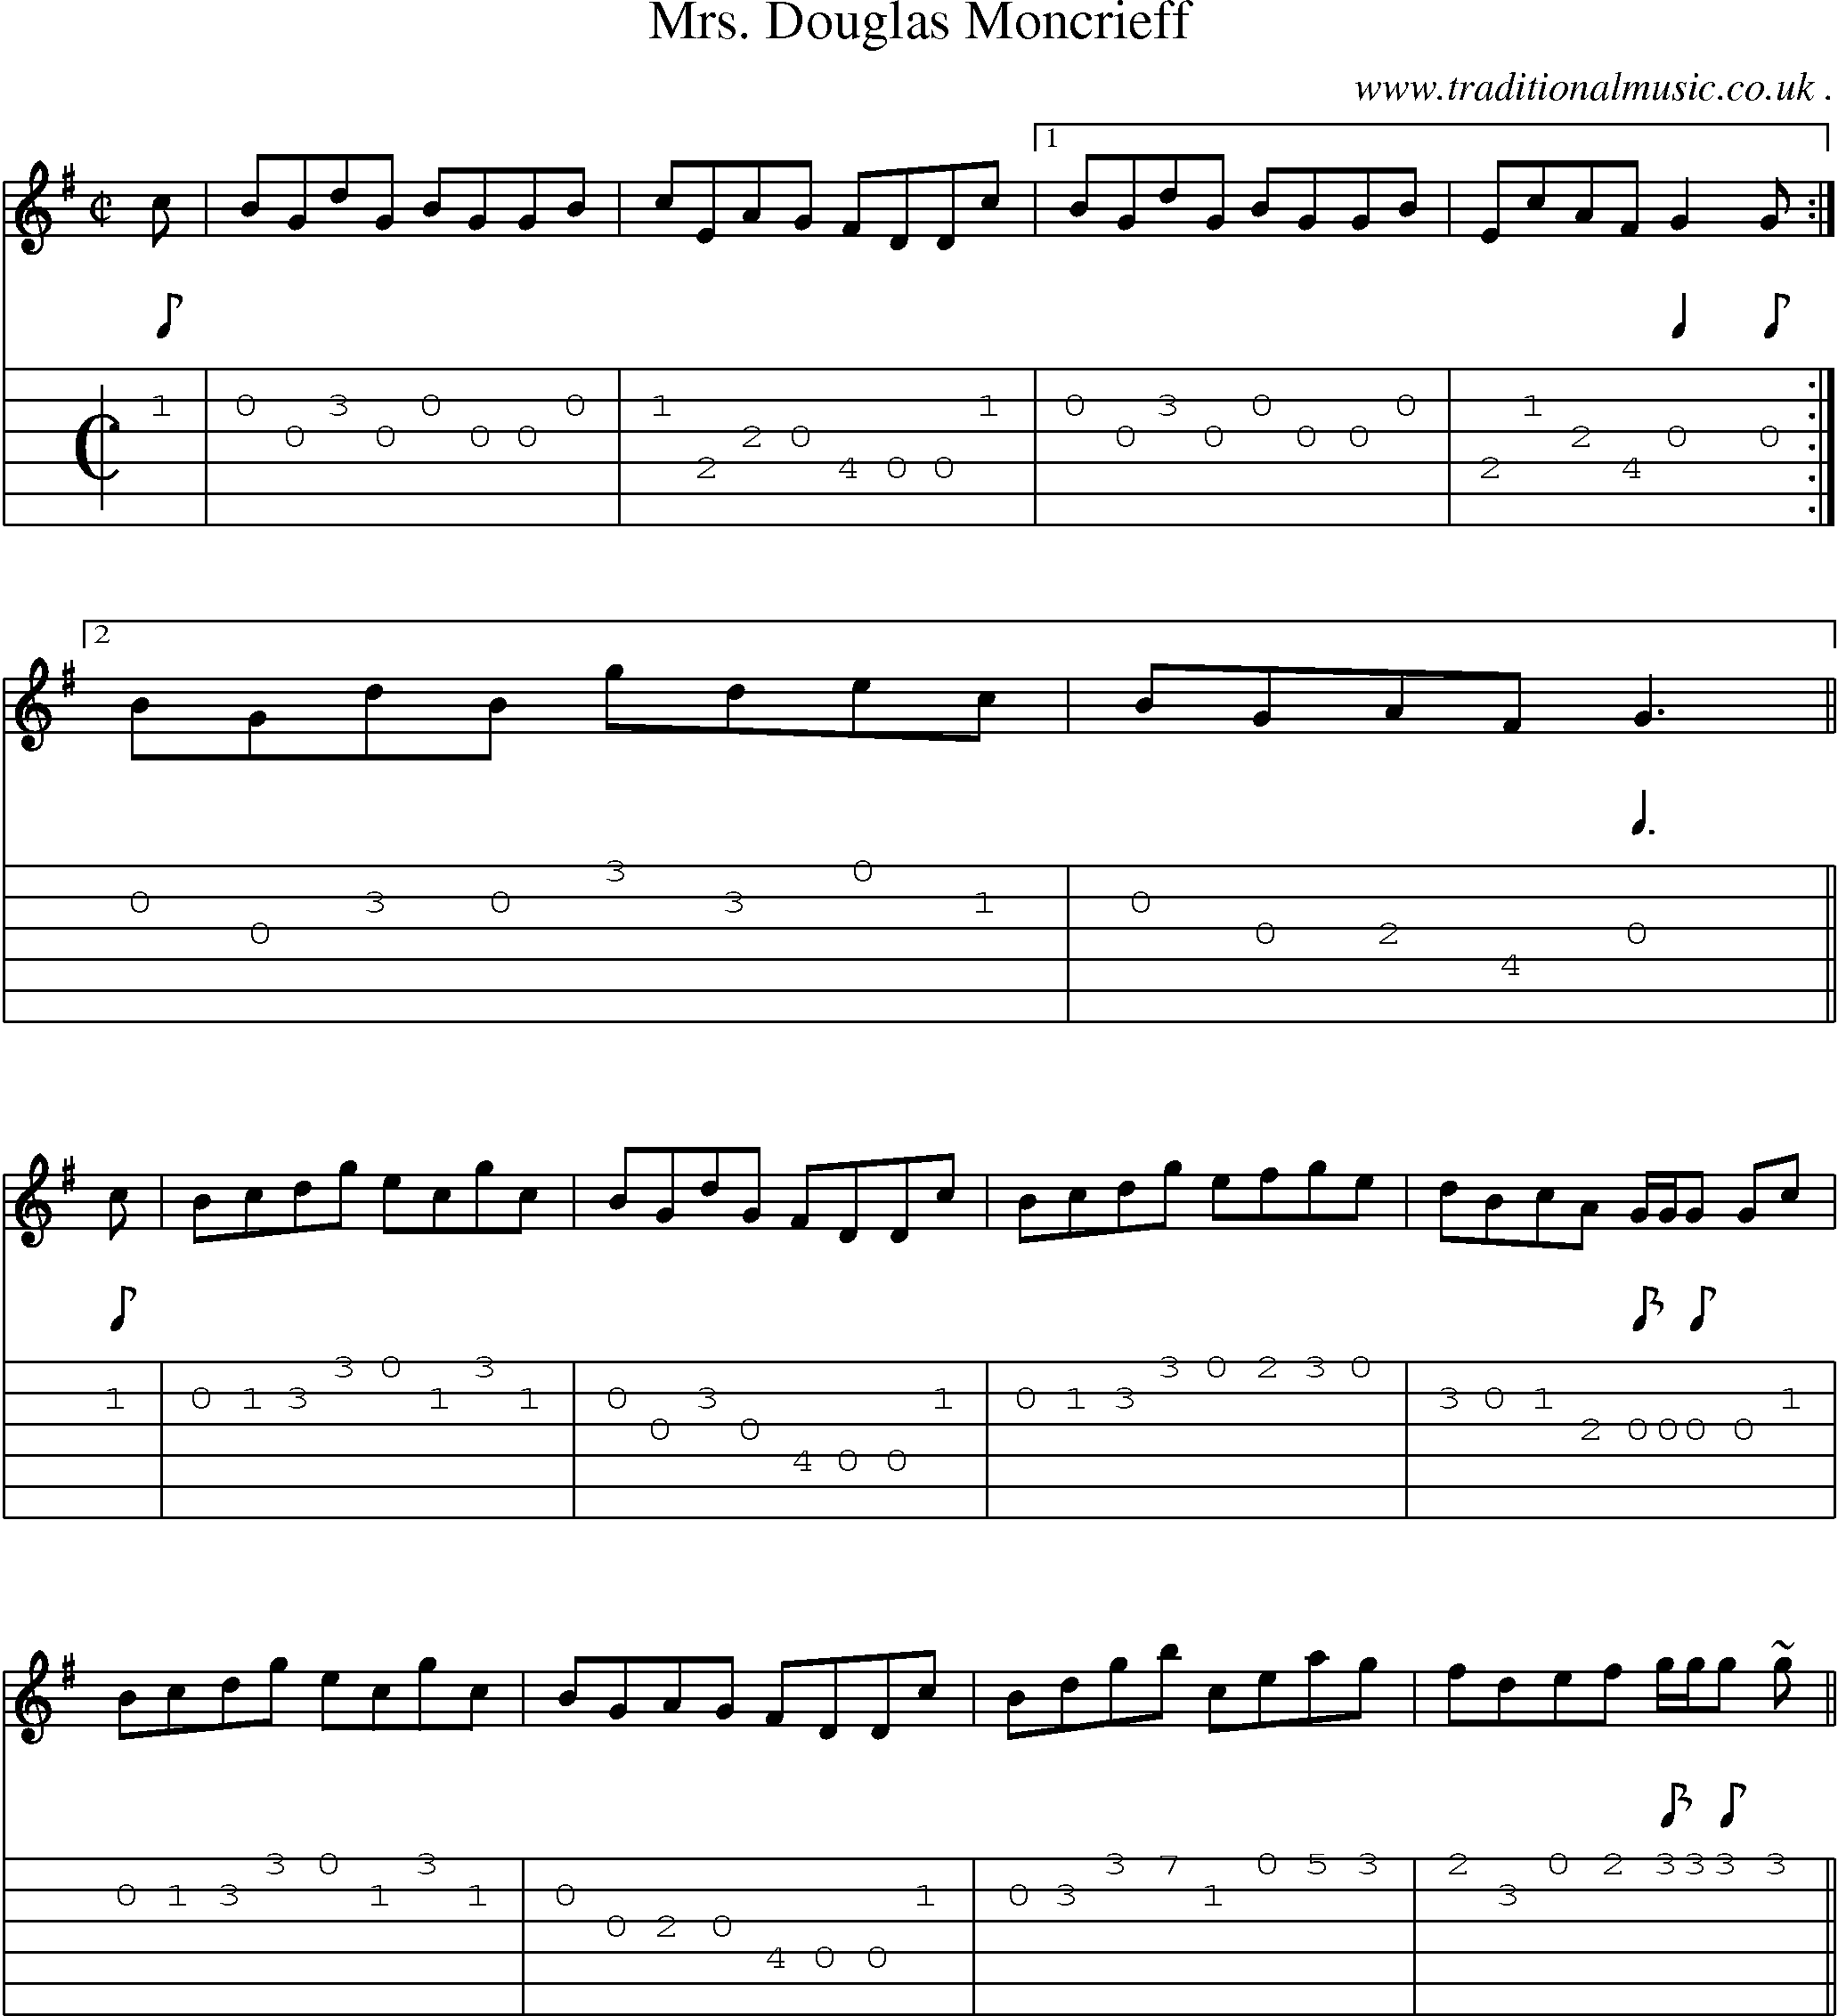 Sheet-music  score, Chords and Guitar Tabs for Mrs Douglas Moncrieff